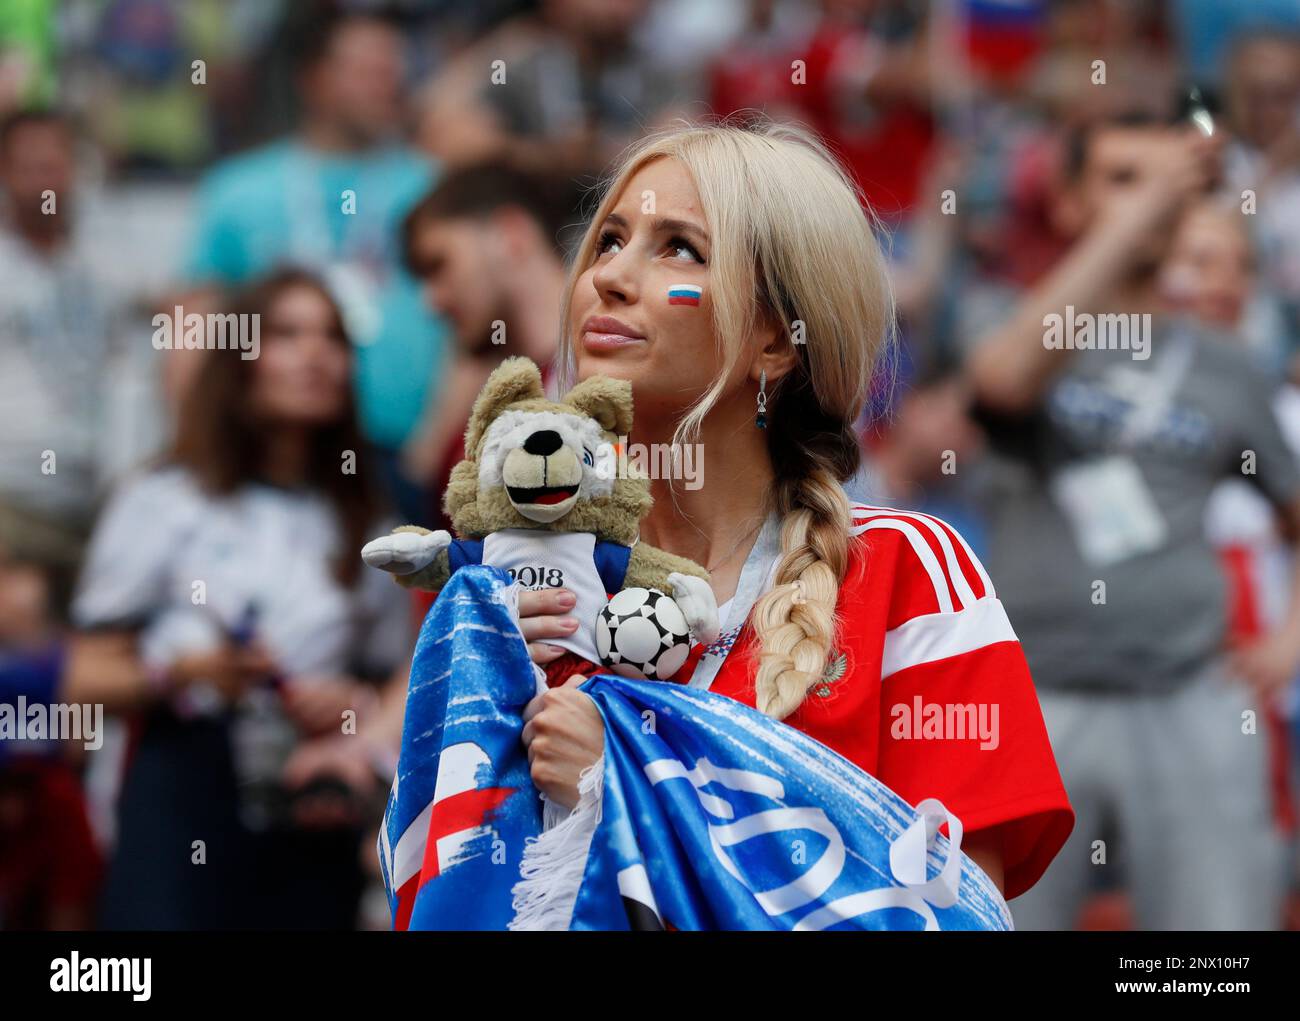 July 1, 2018 - Moscow, United Kingdom - Russian fan ahead of the FIFA World  Cup 2018 Round of 16 match at the Luzhniki Stadium, Moscow. Picture date  1st July 2018. Picture